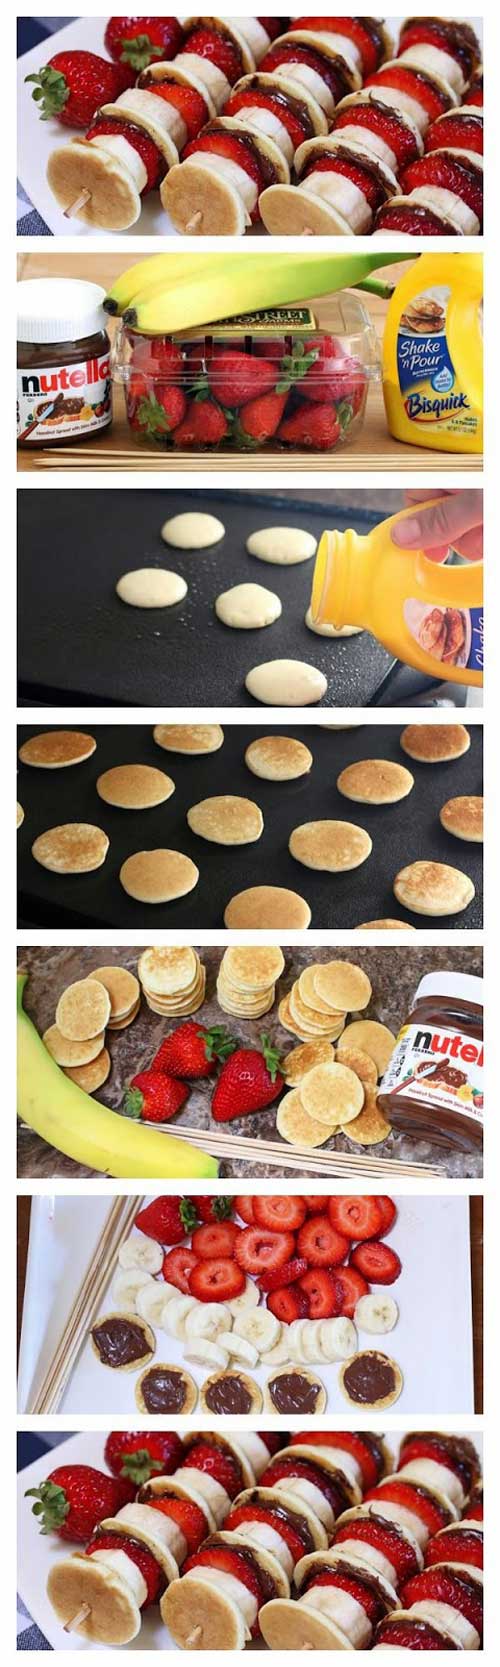 These Nutella Mini Pancake Kabobs are soft and pillowy pancakes slathered with Nutella and layered on skewers with fresh strawberries and banana.